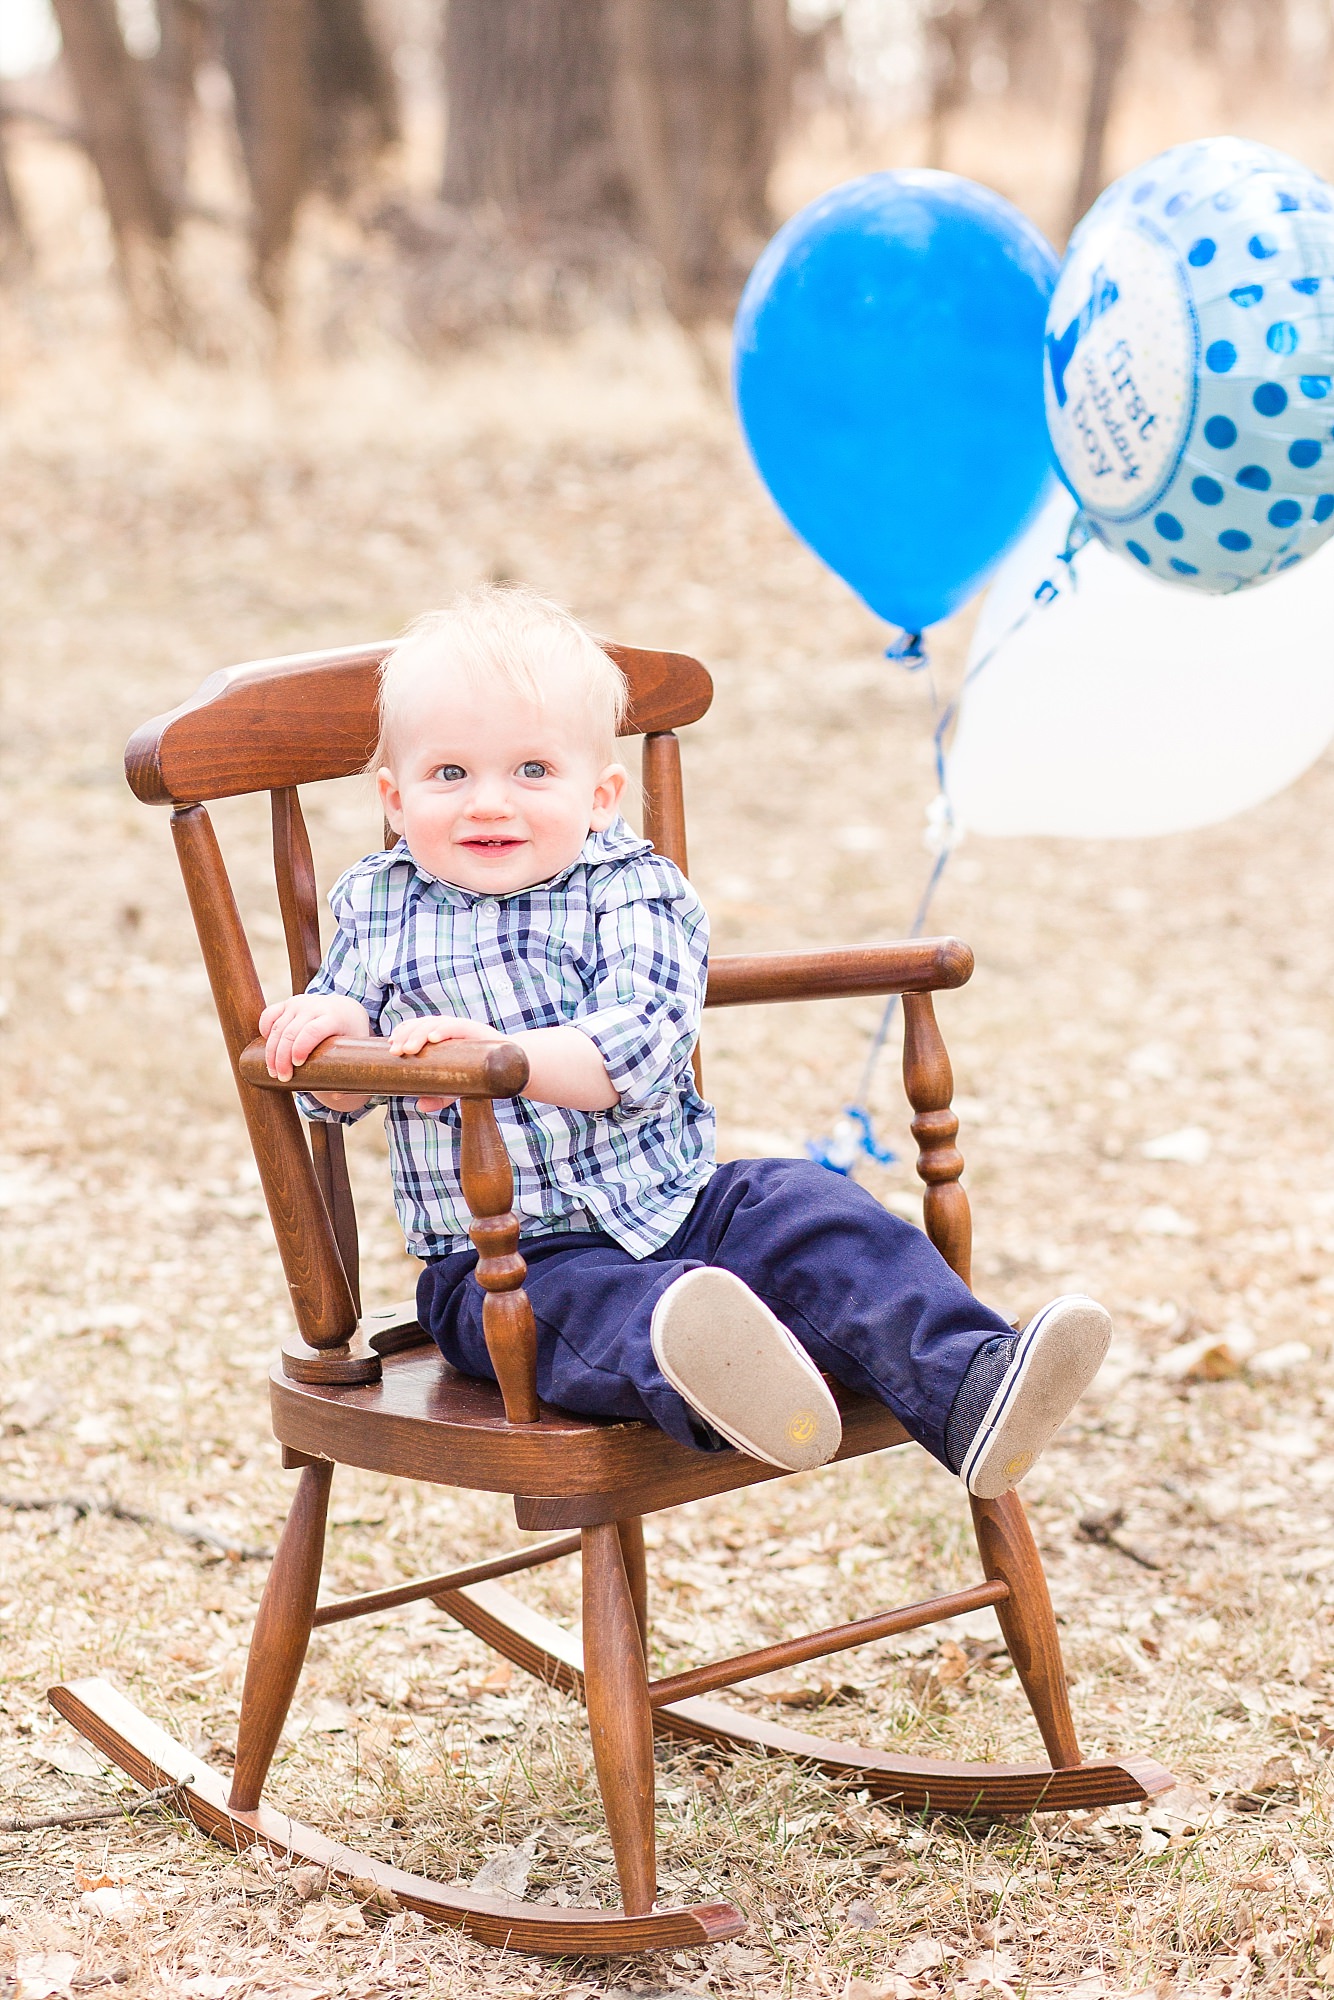 A First Birthday boy sits in a rocking chair with blue balloons blowing in the wind behind him